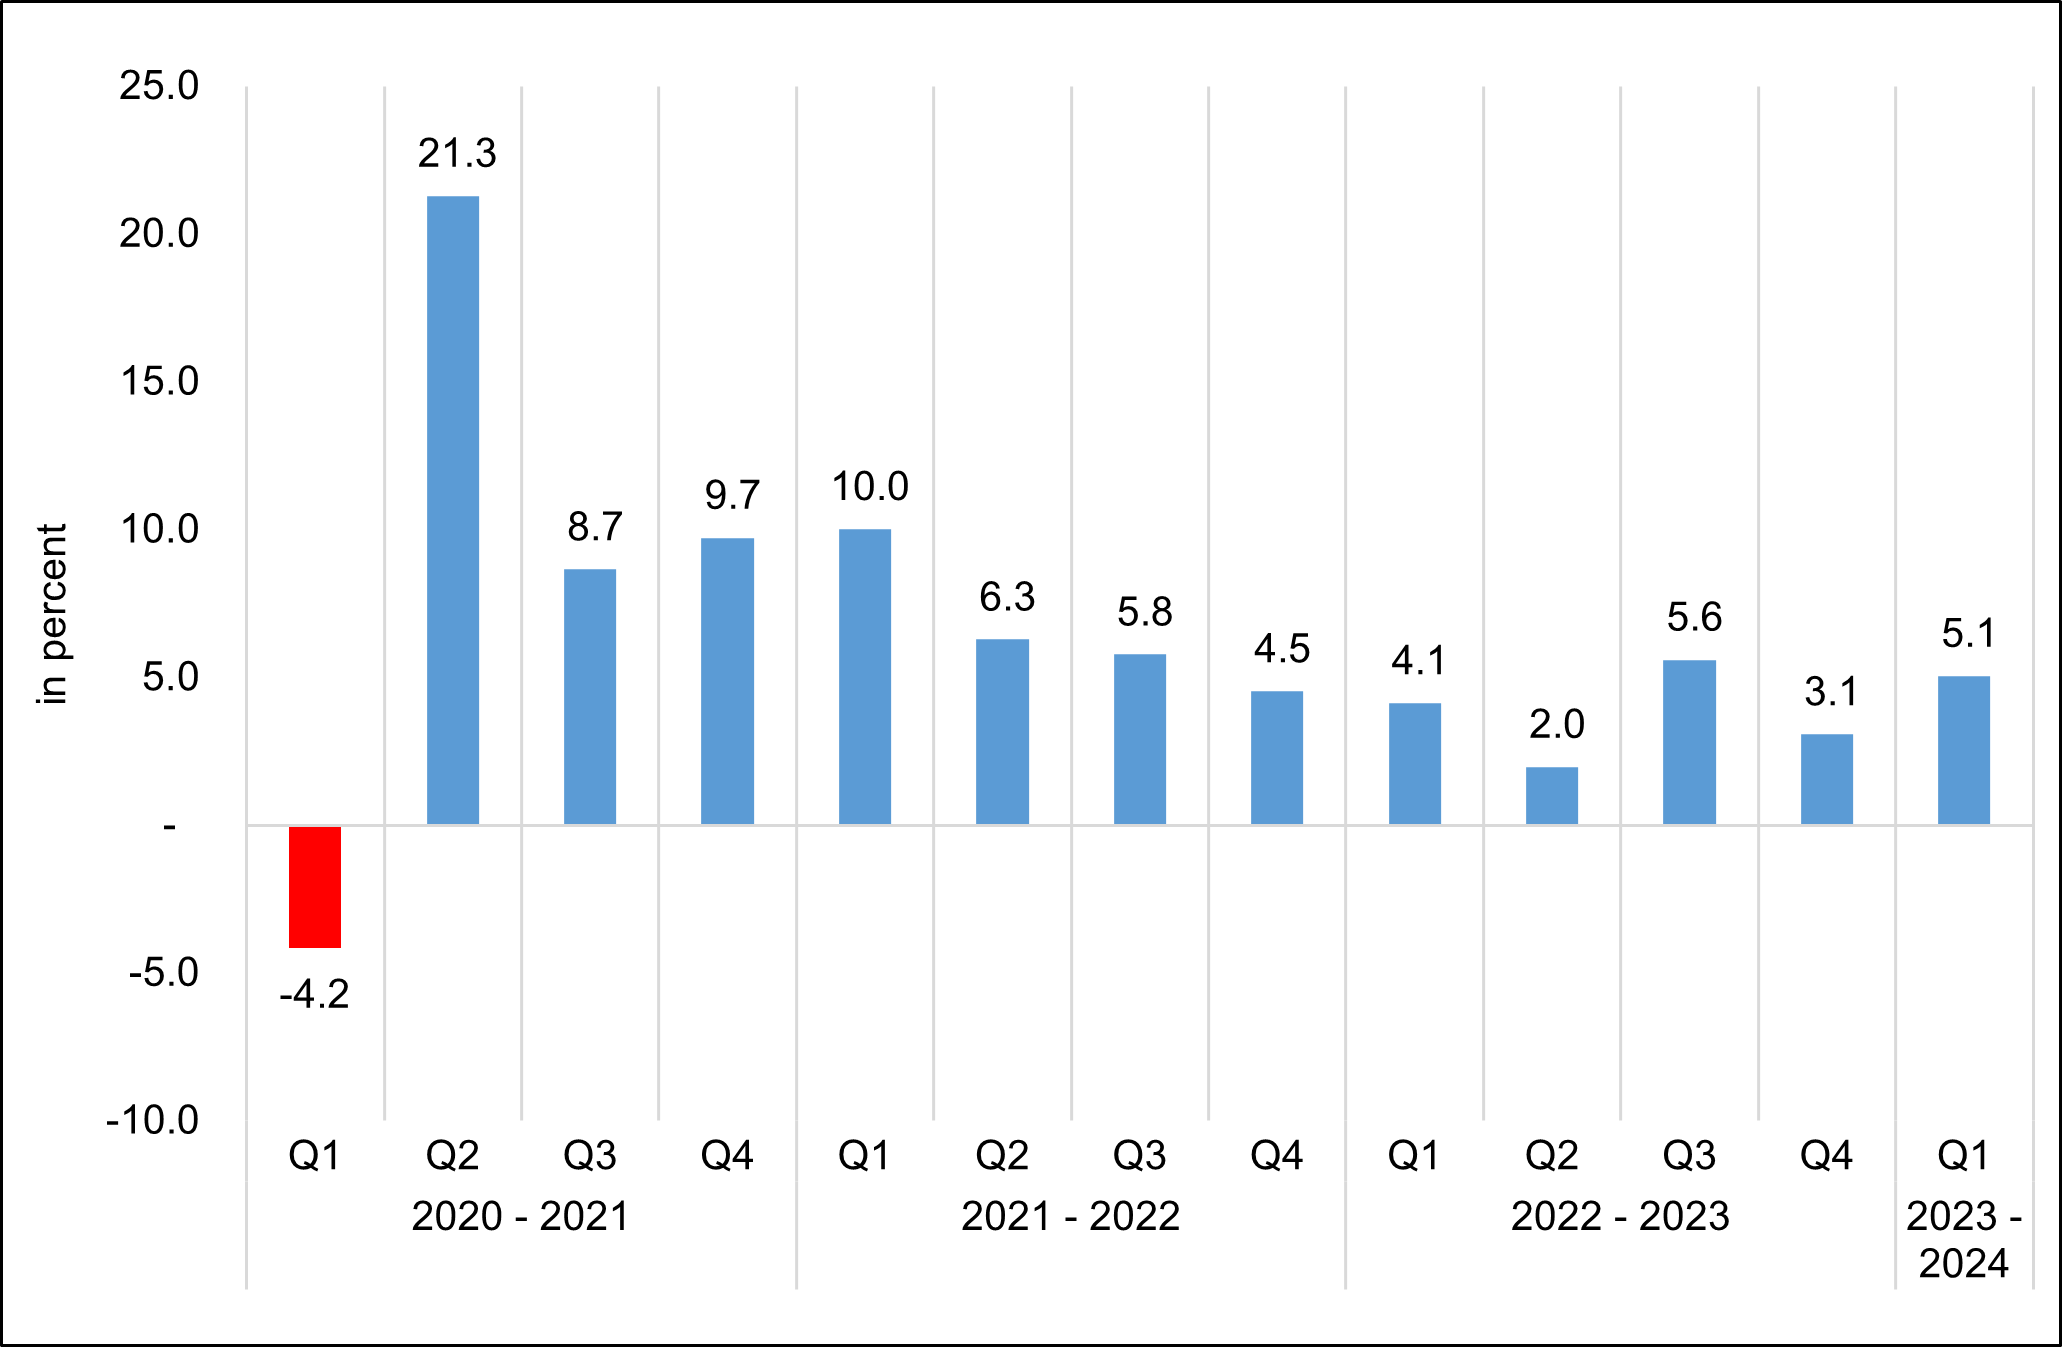 Figure 3. Industry, Q1 2021 to Q1 2024 Growth Rates, At Constant 2018 Prices